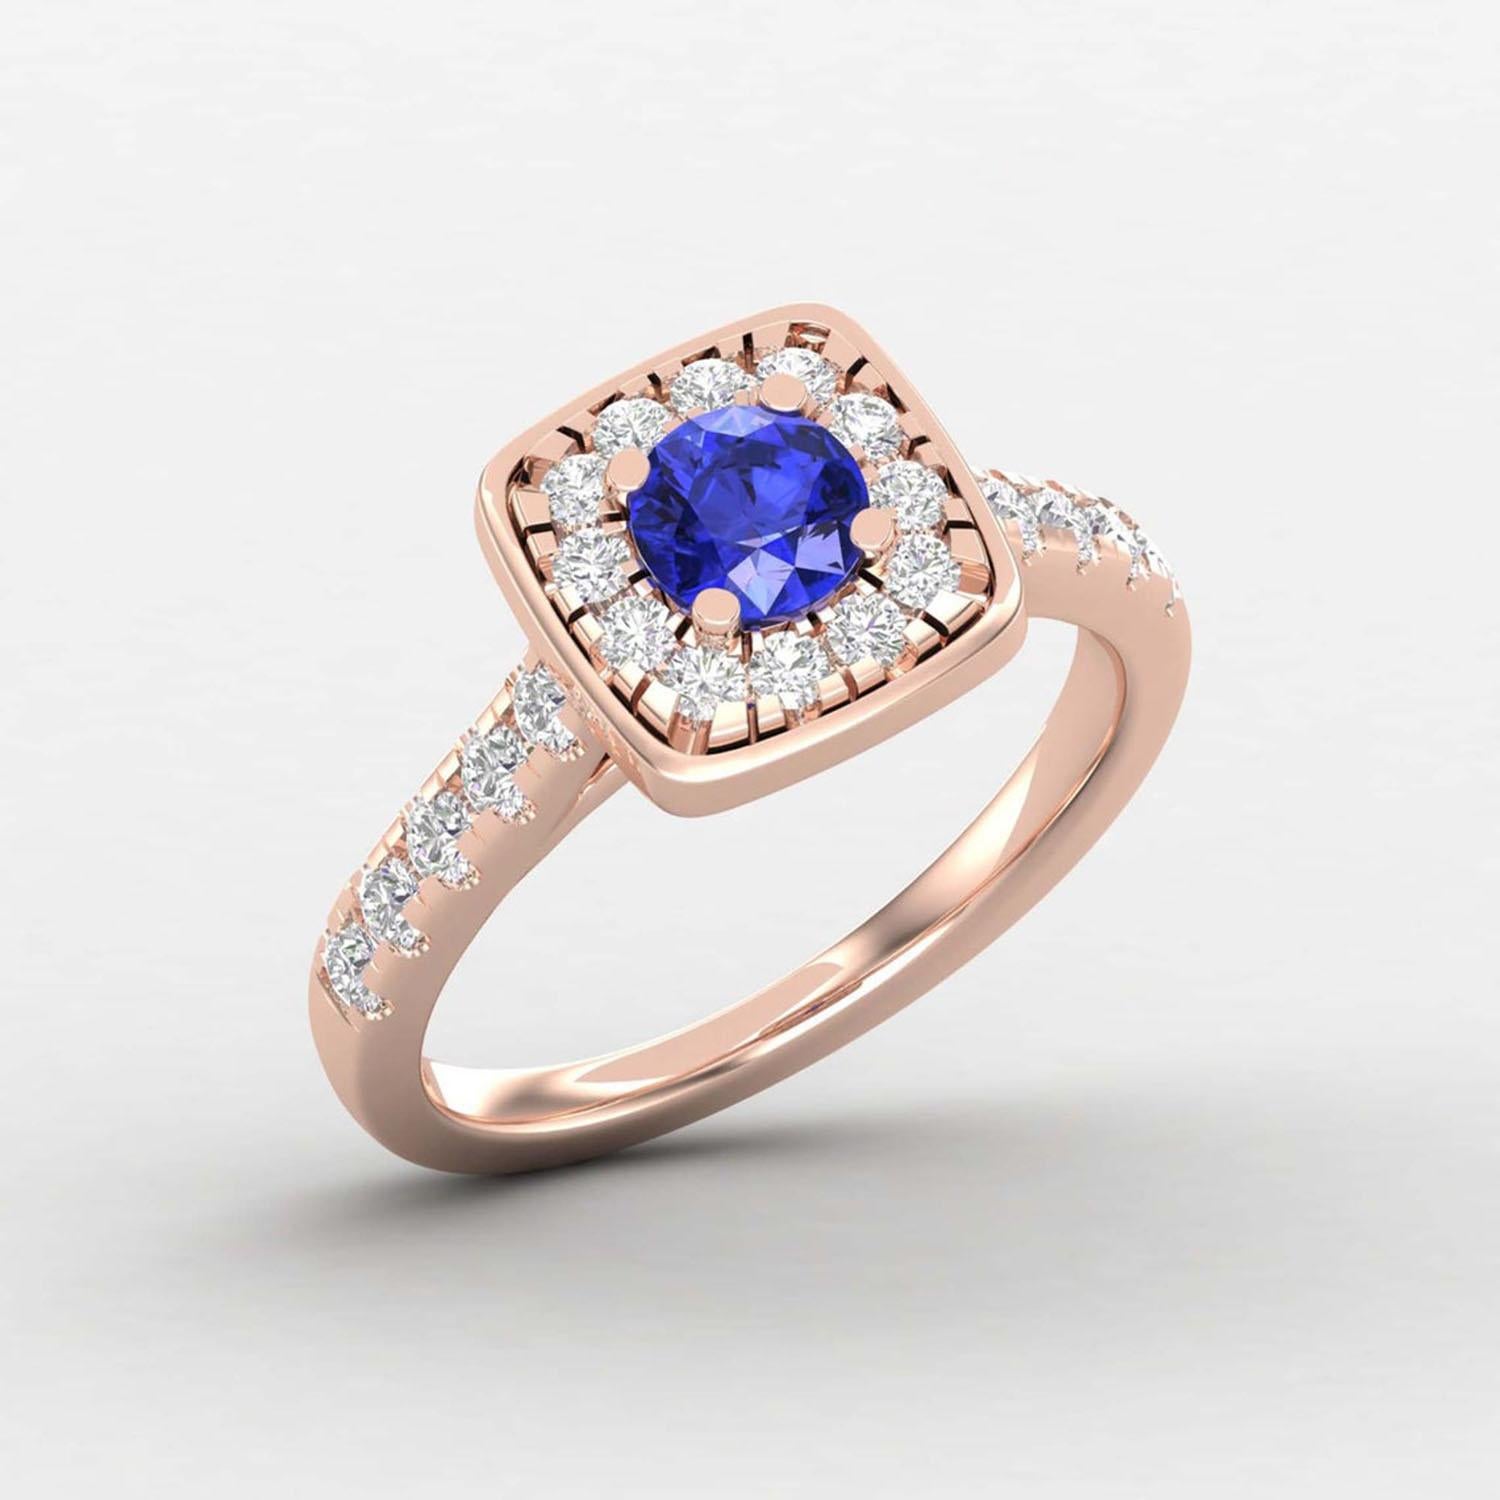 Round Cut 14 Karat Gold Tanzanite Ring / Diamond Solitaire Ring / Ring for Her For Sale